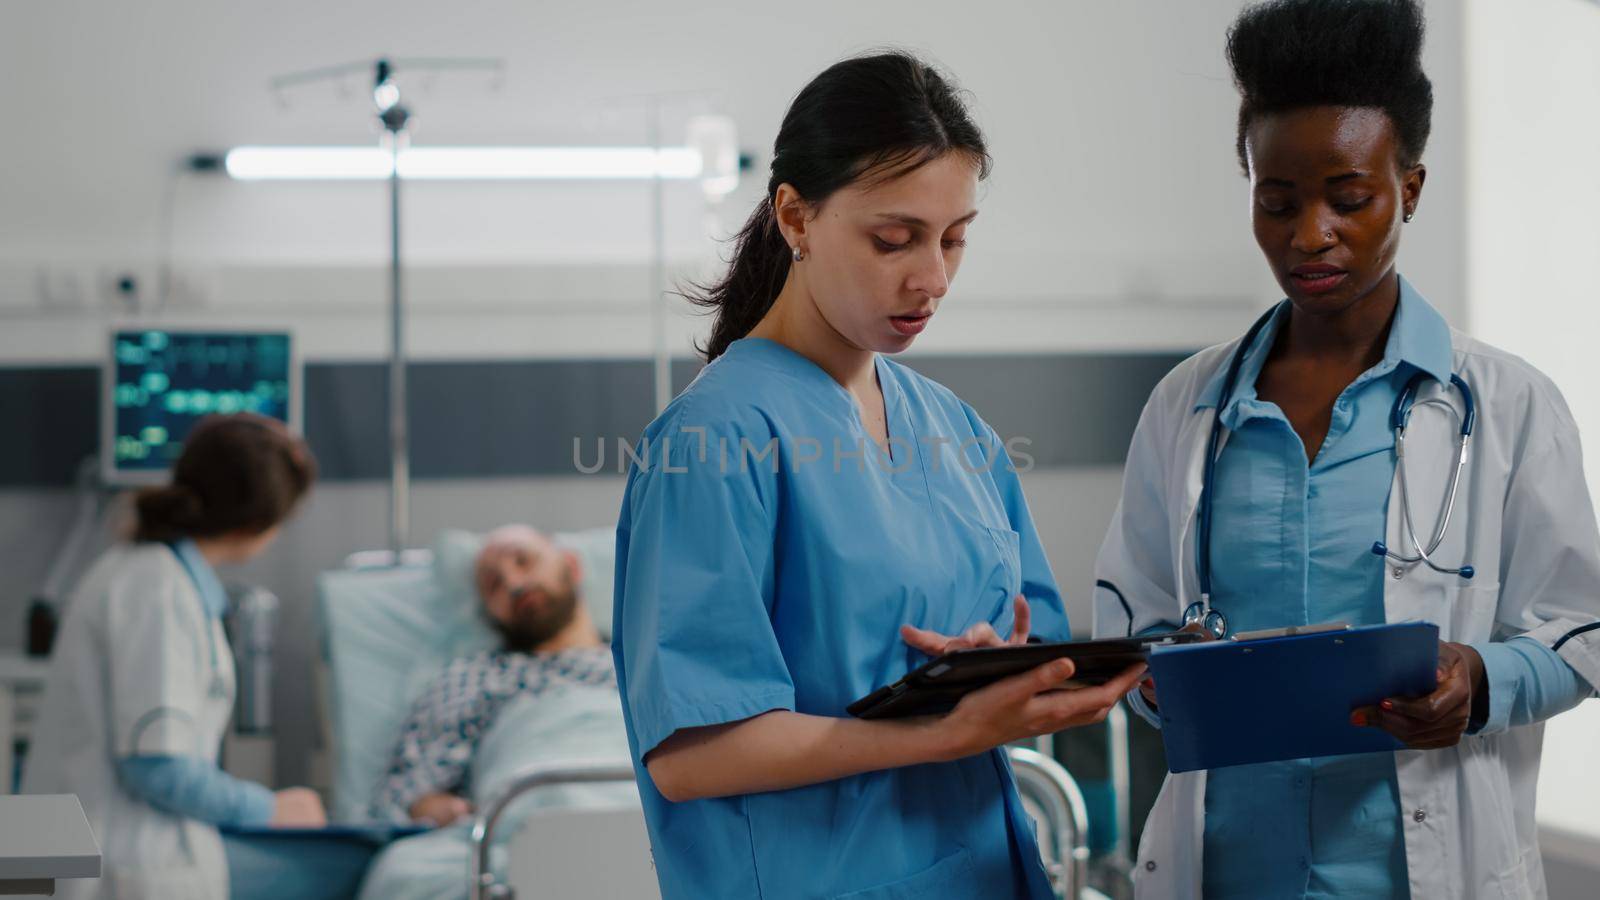 Woman nurse showing medical expertise using tablet computer to specialist black doctor woman. Hospitalized patient discussing healthcare treatment during recovery consultation